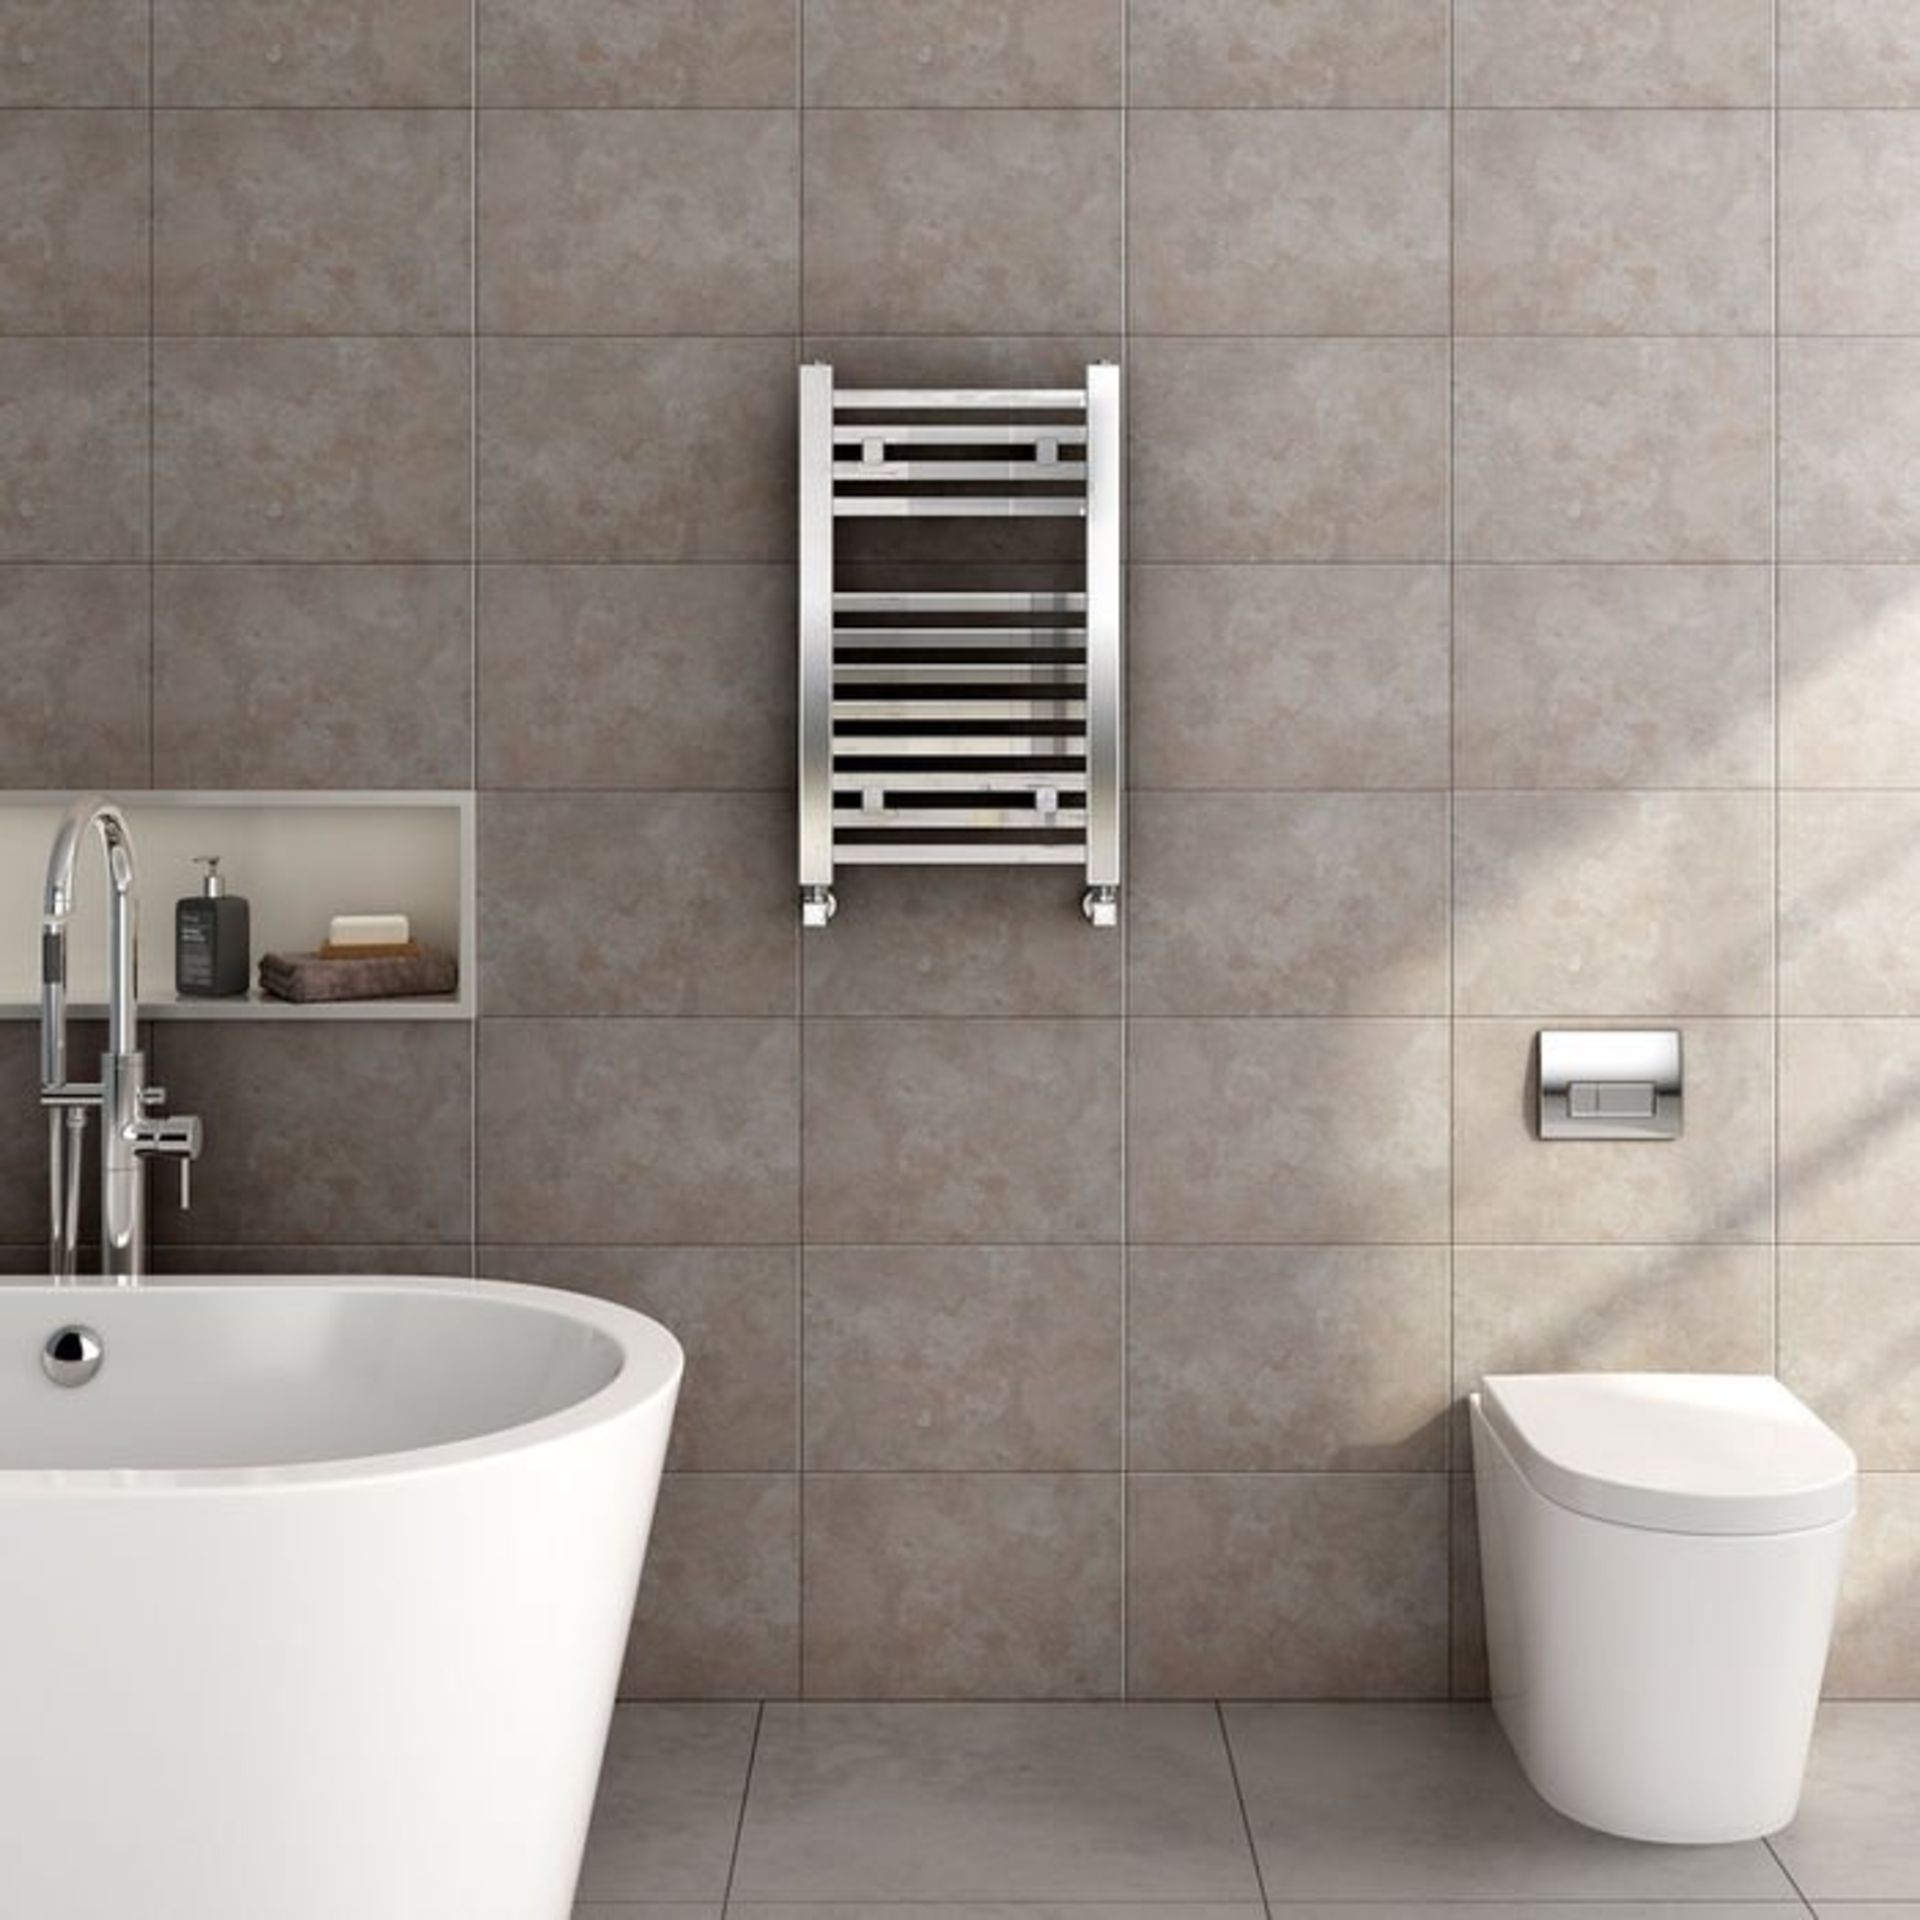 (Z175) 650x400mm Chrome Square Rail Ladder Towel Radiator. Low carbon steel chrome plated radiator - Image 2 of 3